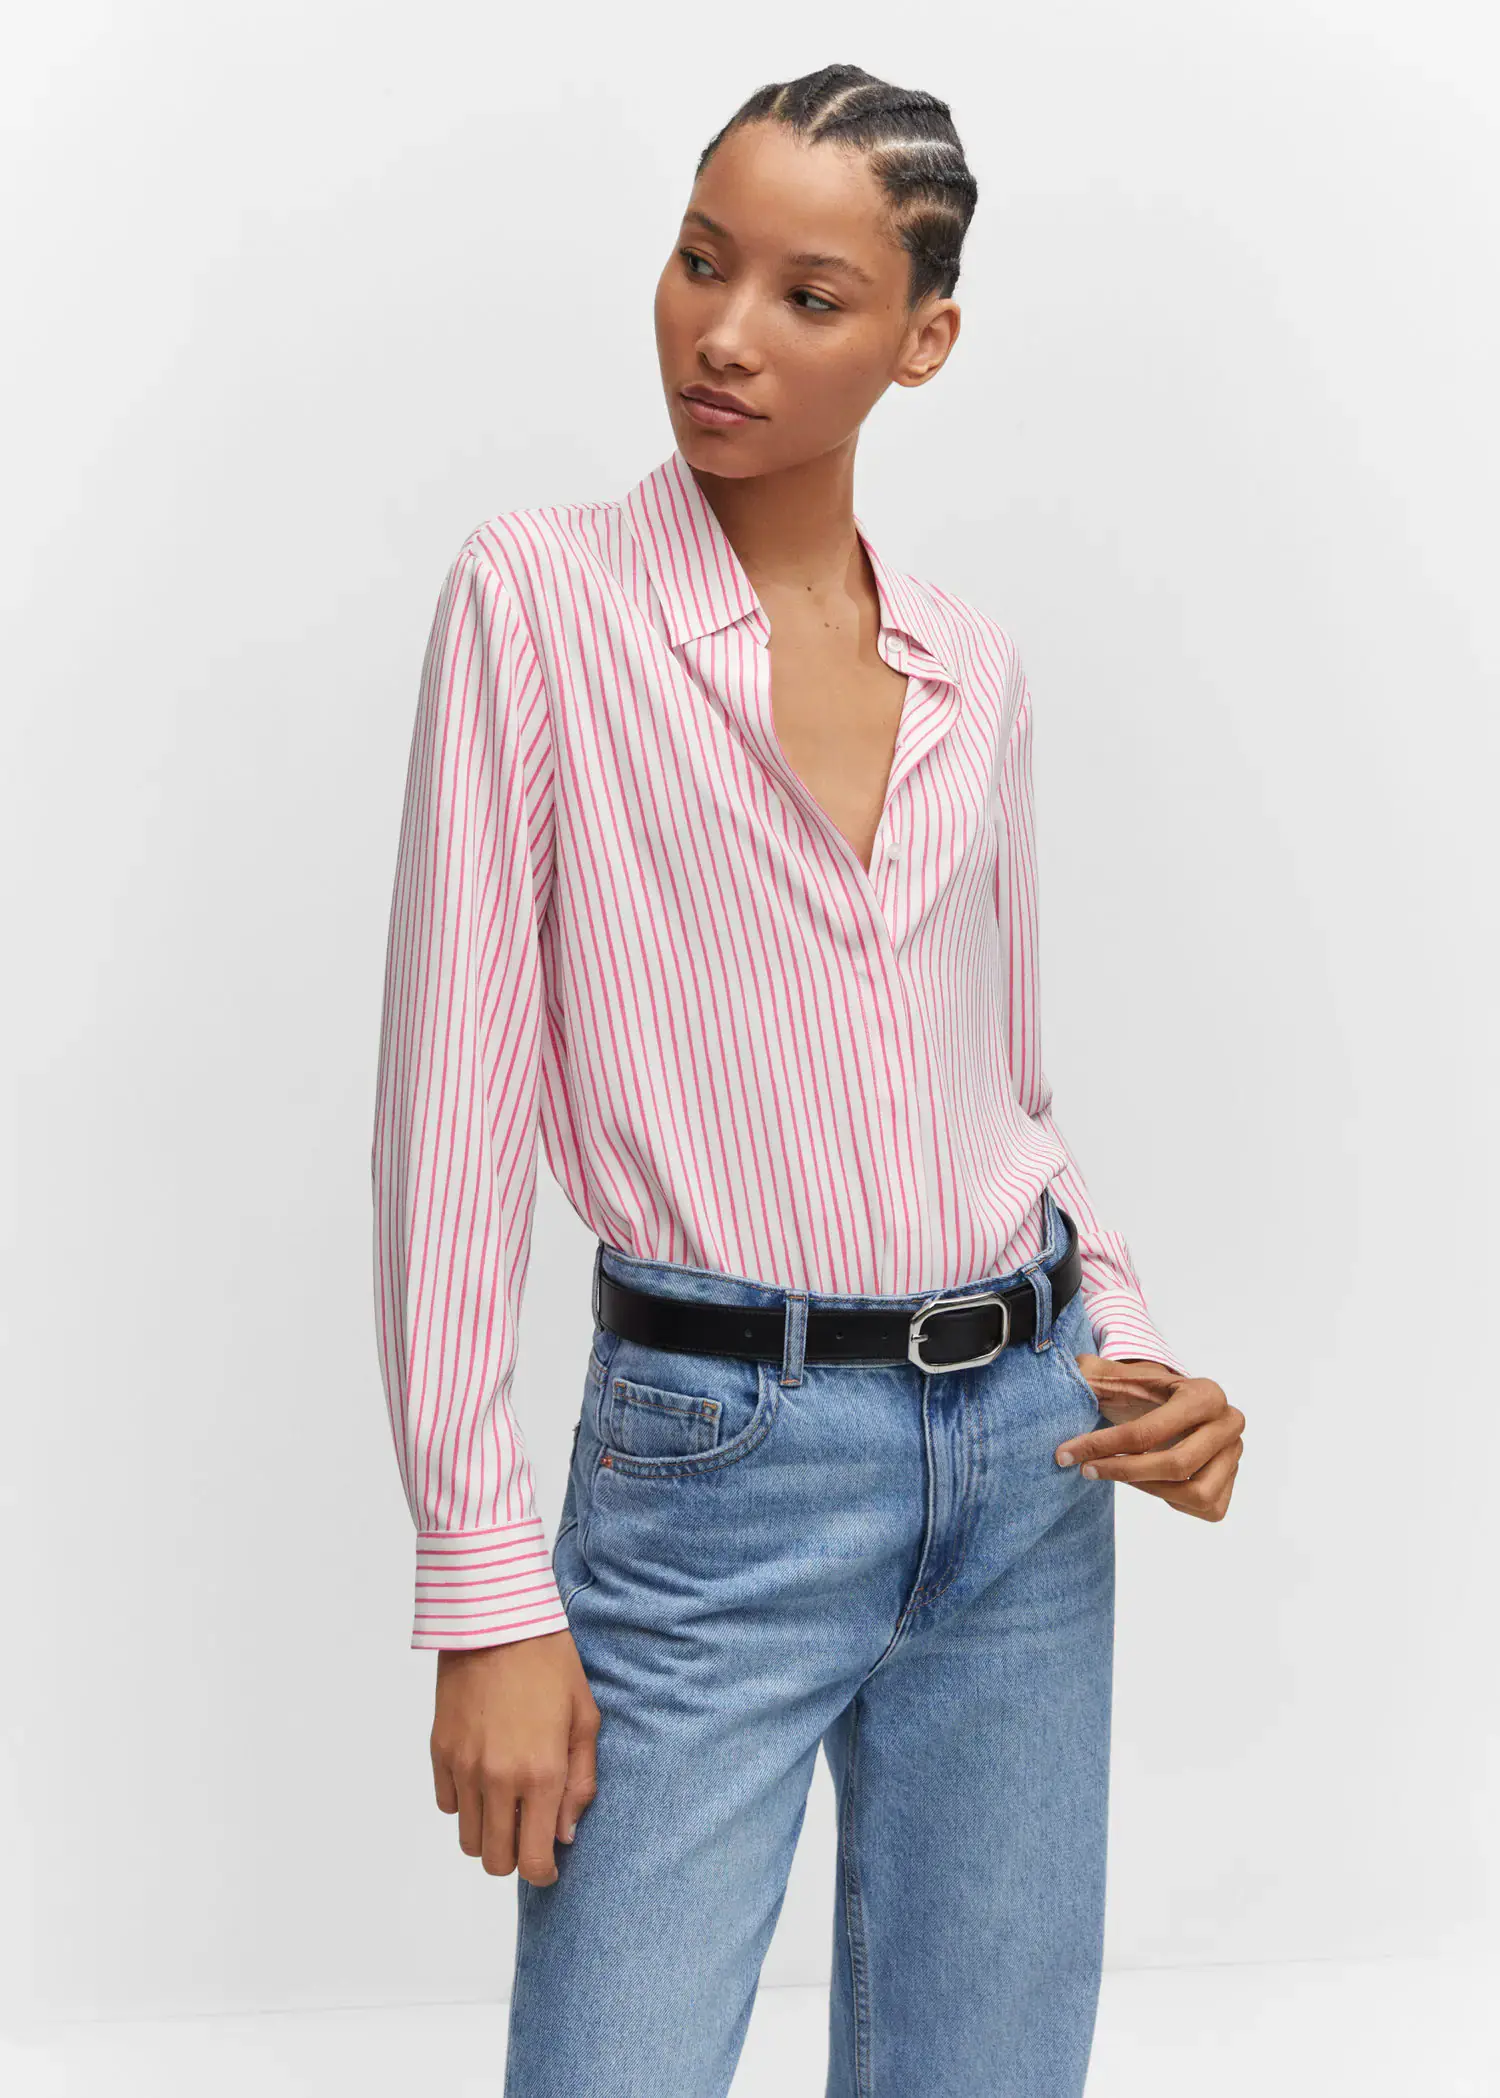 Mango Regular flowy shirt. a woman wearing a pink and white striped shirt and jeans. 